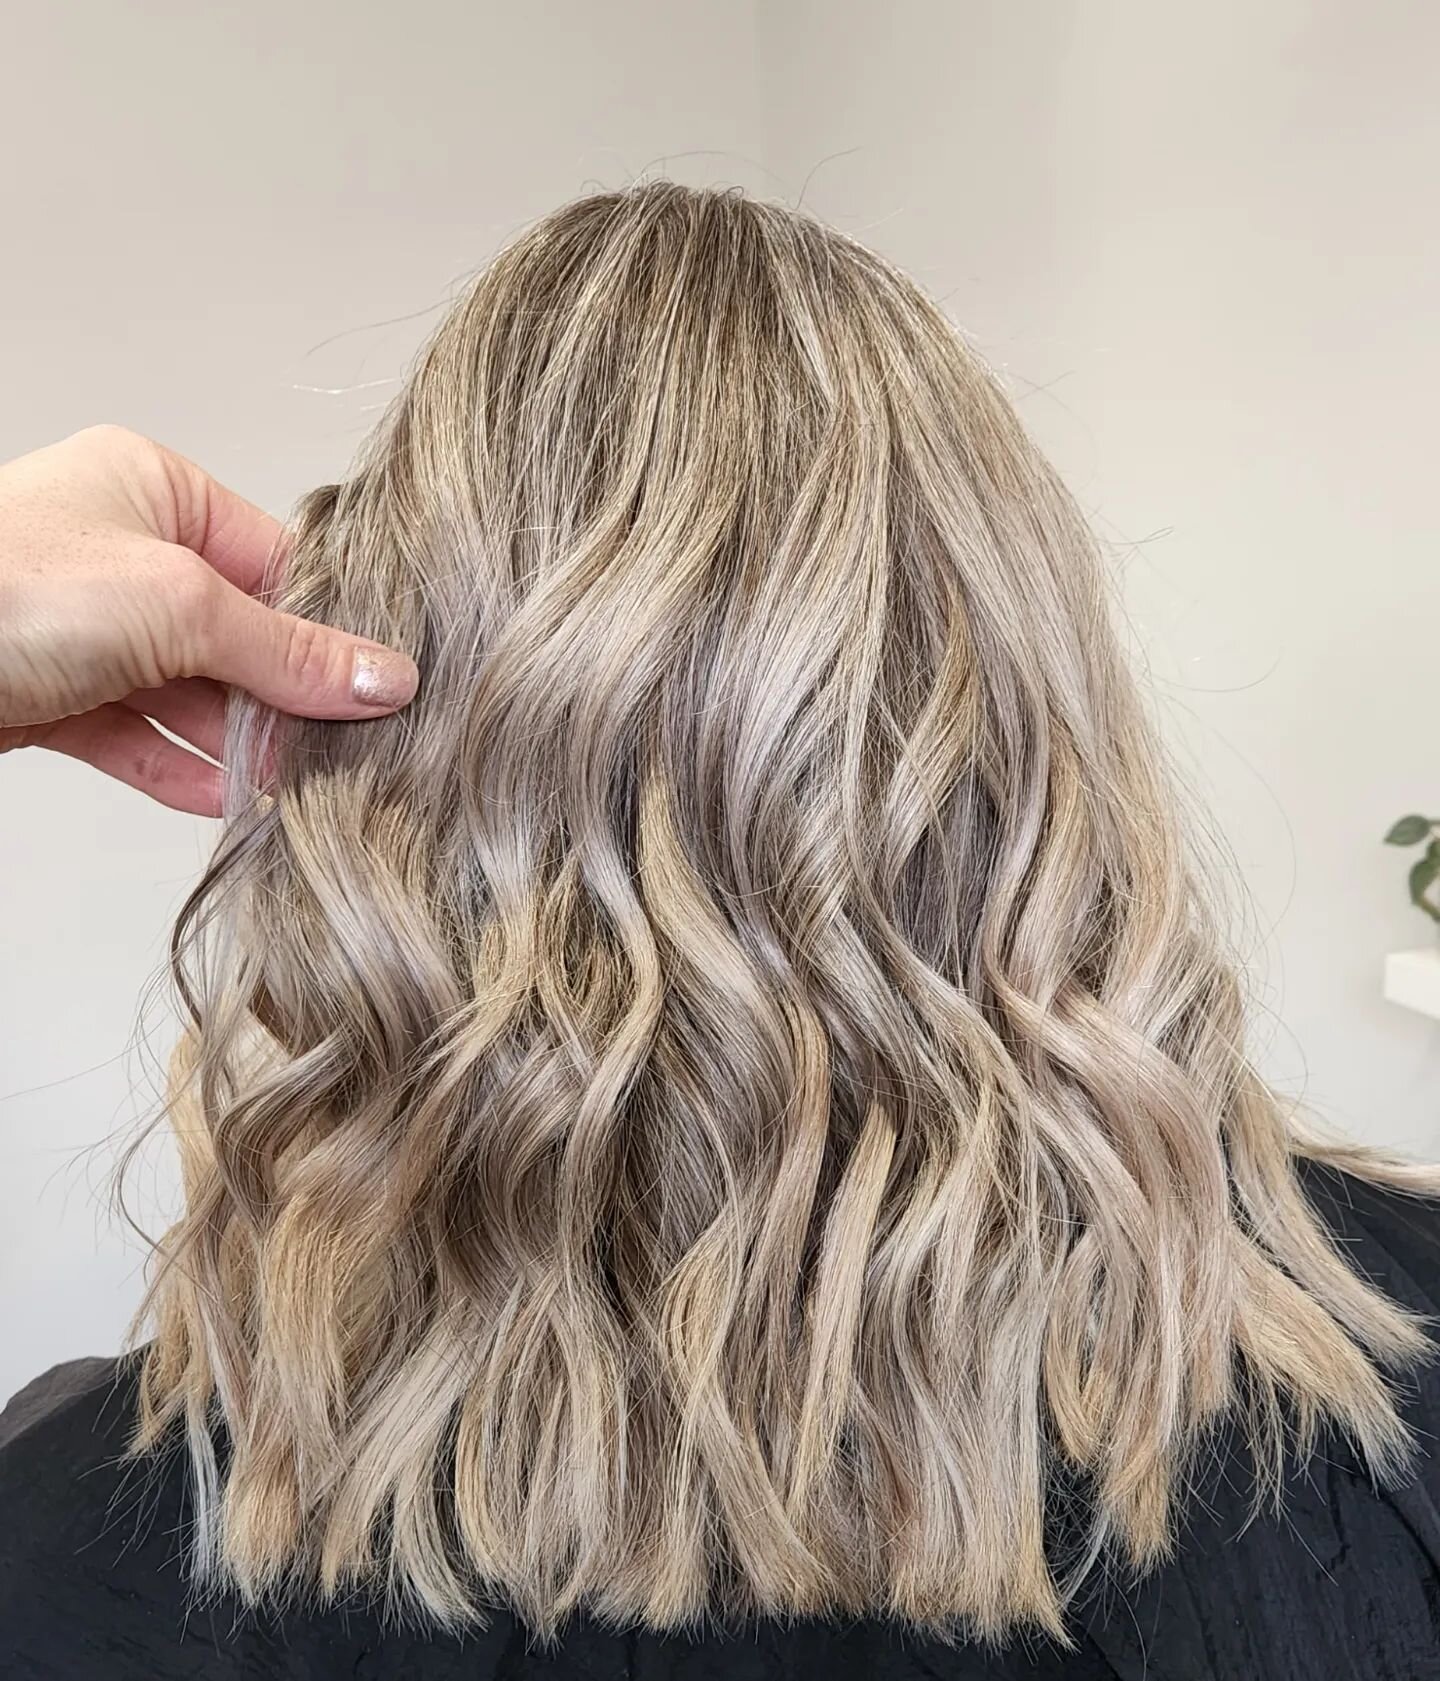 Clean live In blondes using @keuneanz cream blonde and 6% 
gloss 10.7,9.1 1+2 
Styled with @cloudnineoz 

#cleanblondes #keunecolor #hairartistrybykirri #colourspecialist